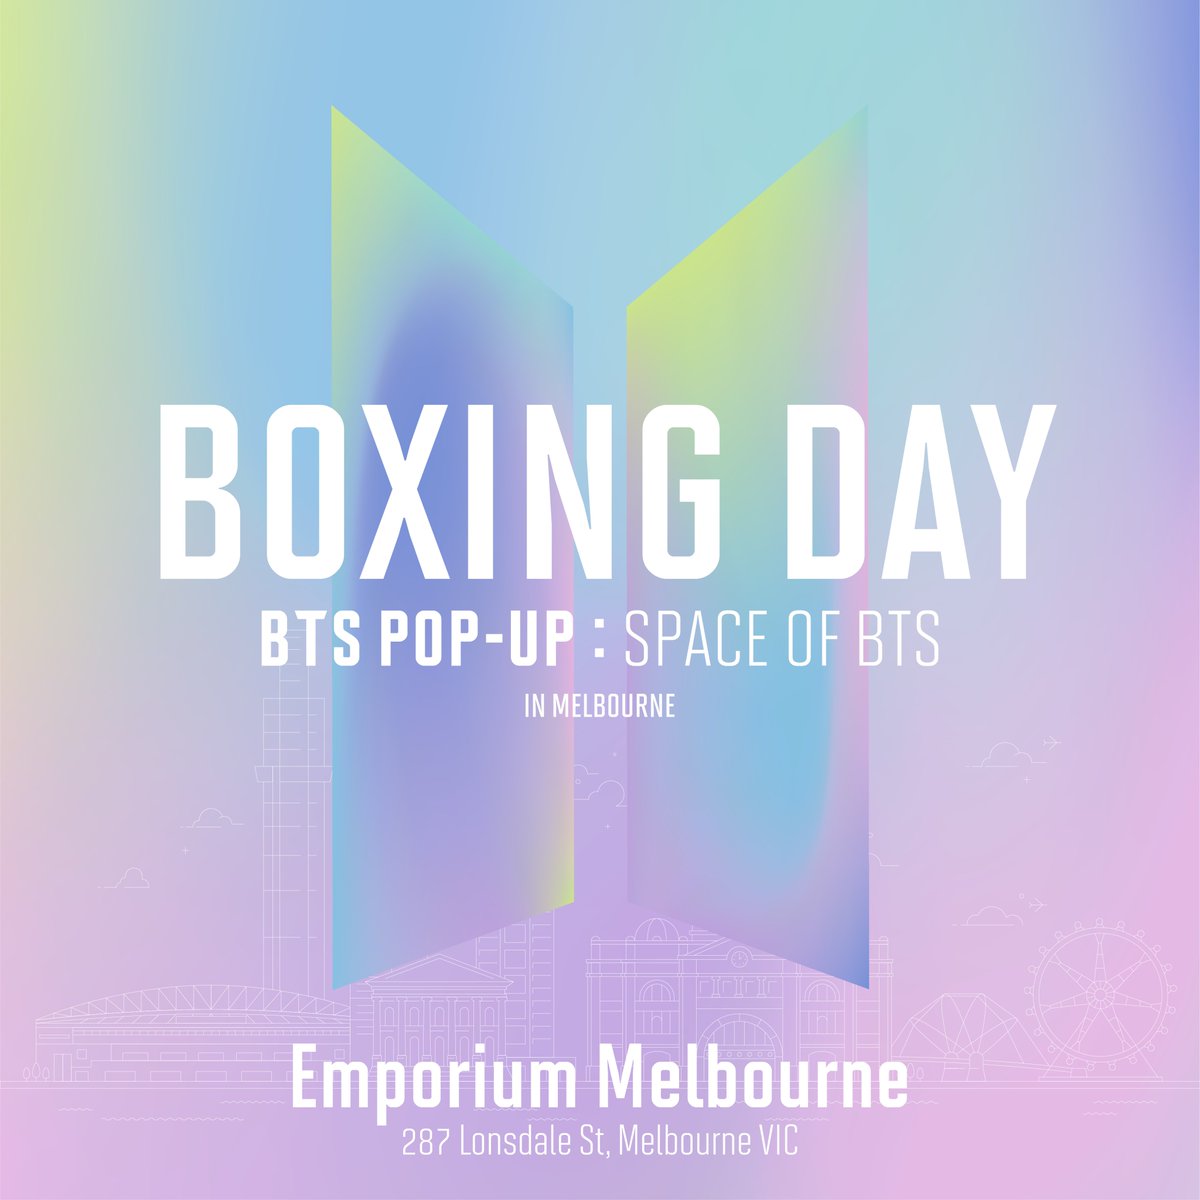 [BTS POP-UP: SPACE OF BTS in MELBOURNE] Boxing Day sales have arrived! 💜 Enjoy 20% off your total when you purchase two items or more in-store. ⁠ 📆 DEC 26 - DEC 31 📍 Lower Ground Level, Emporium Melbourne Exclusions apply. #BTS #BTS_POPUP #SPACE_OF_BTS #MELBOURNE